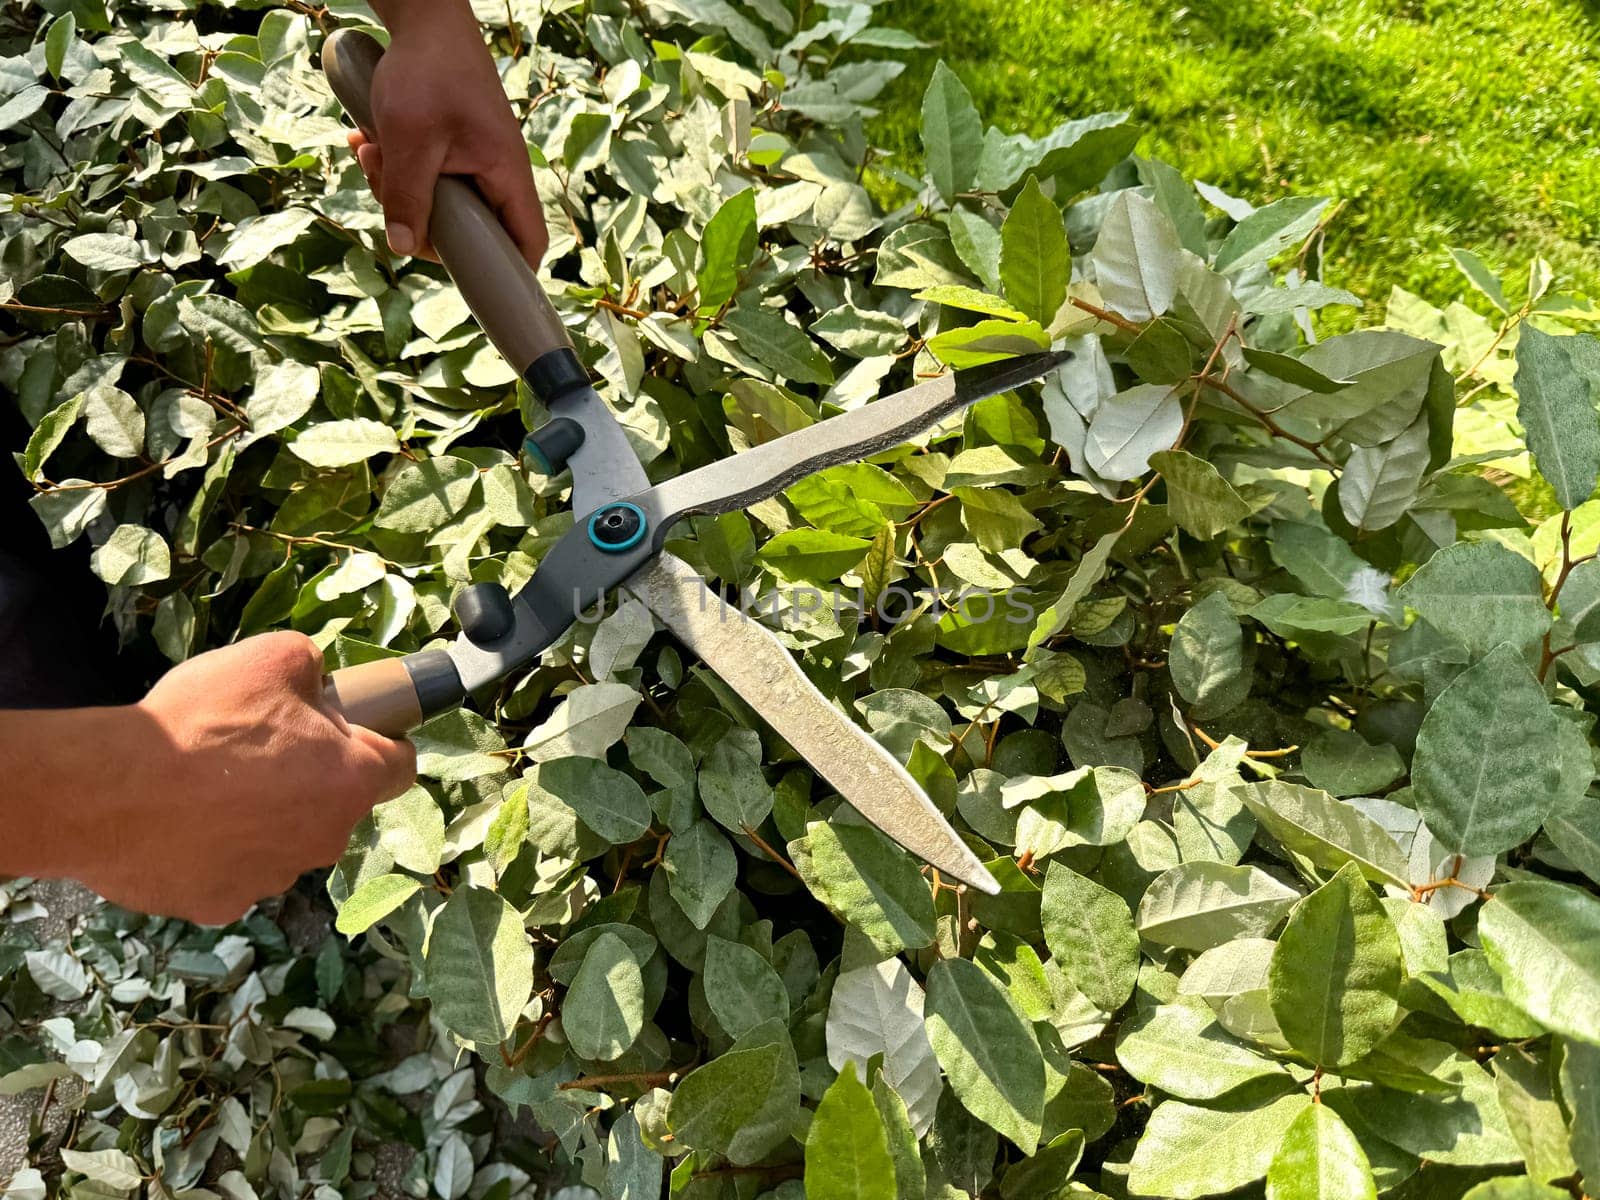 Close up of hands using garden shears to prune lush green bushes during sunny day. Detailed gardening work and plant care. Trimming growing garden fence. High quality photo